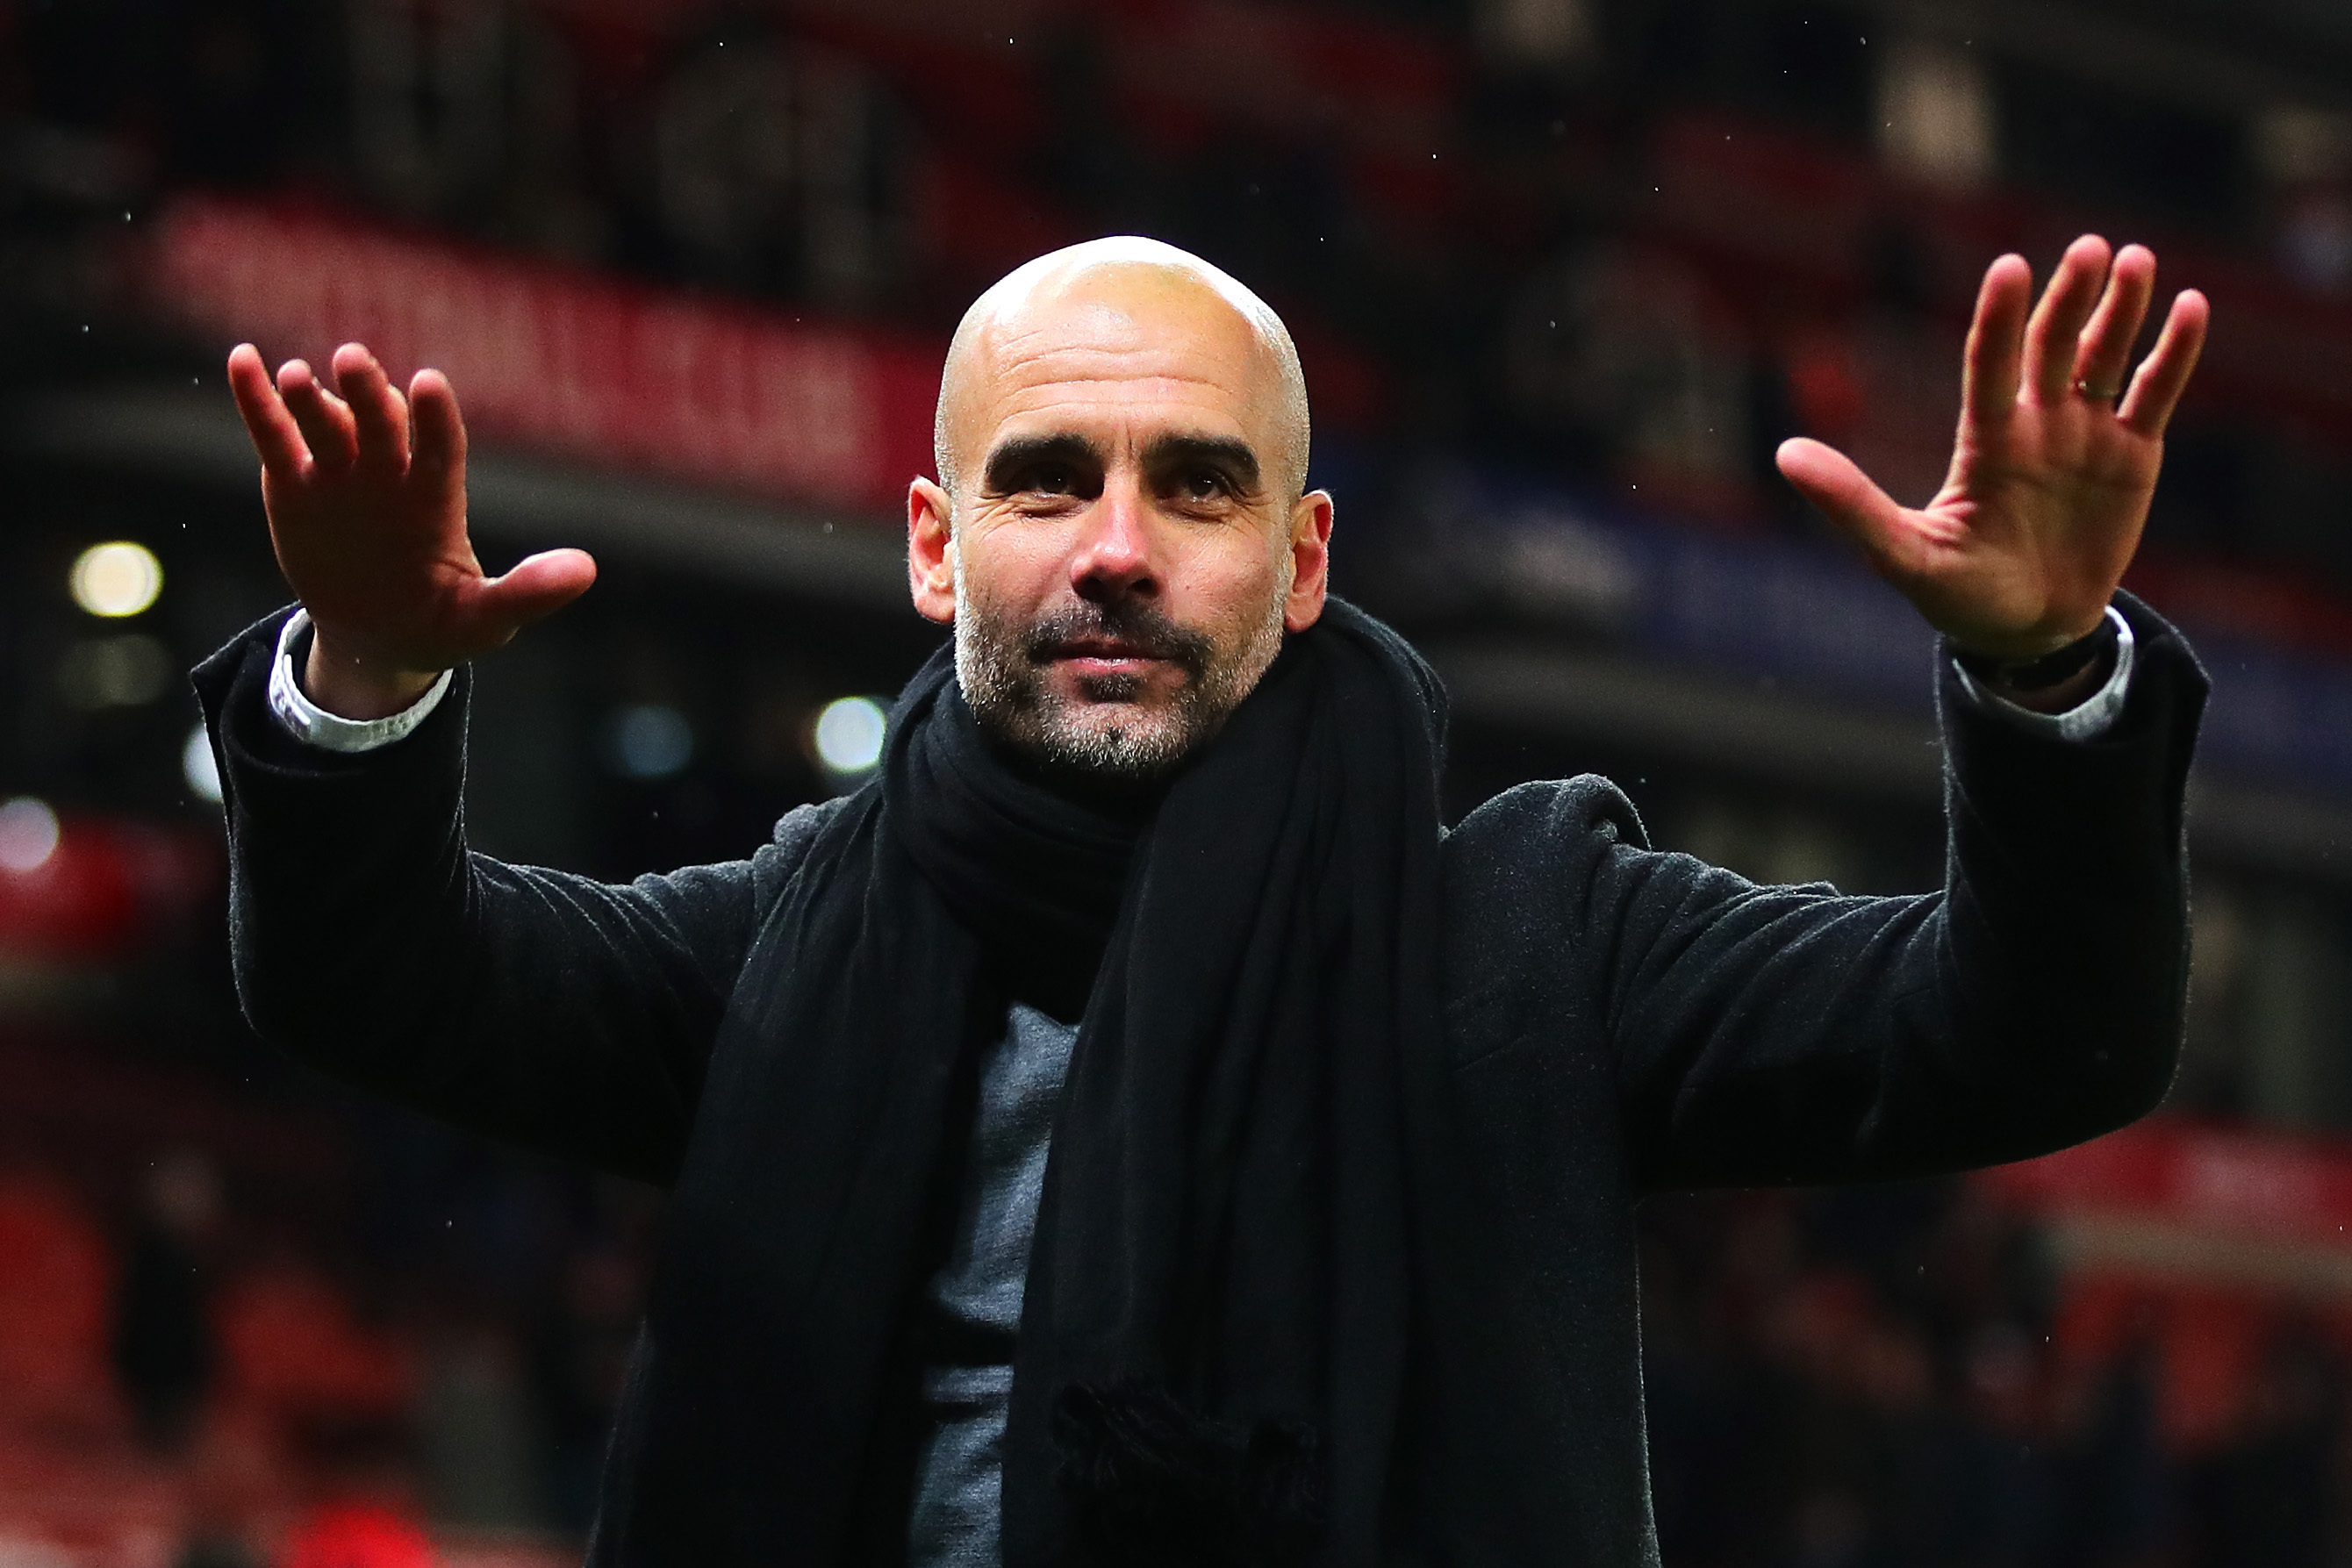 PEP GUARDIOLA - WORLD BEST COACH FOURFOURTWO VERSION OF THE WORLD OF THE SEASON, KUMAN - 47TH